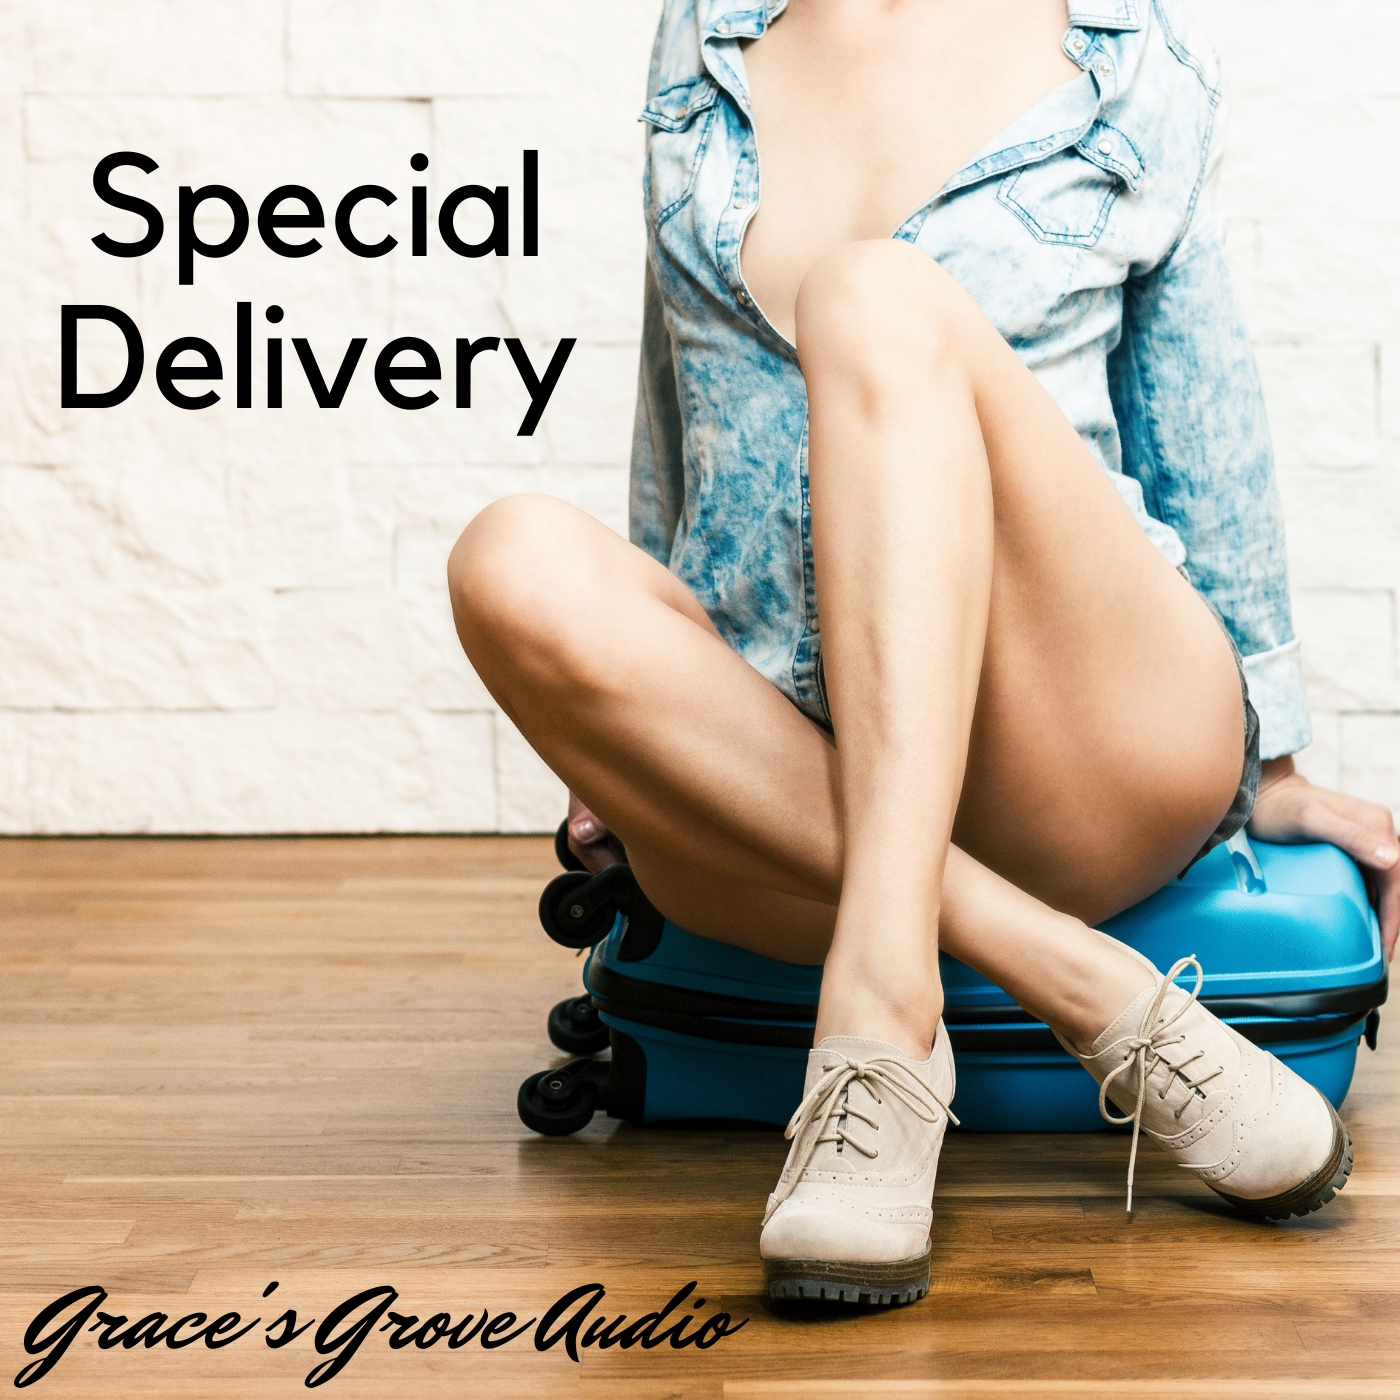 Special Delivery's cover image